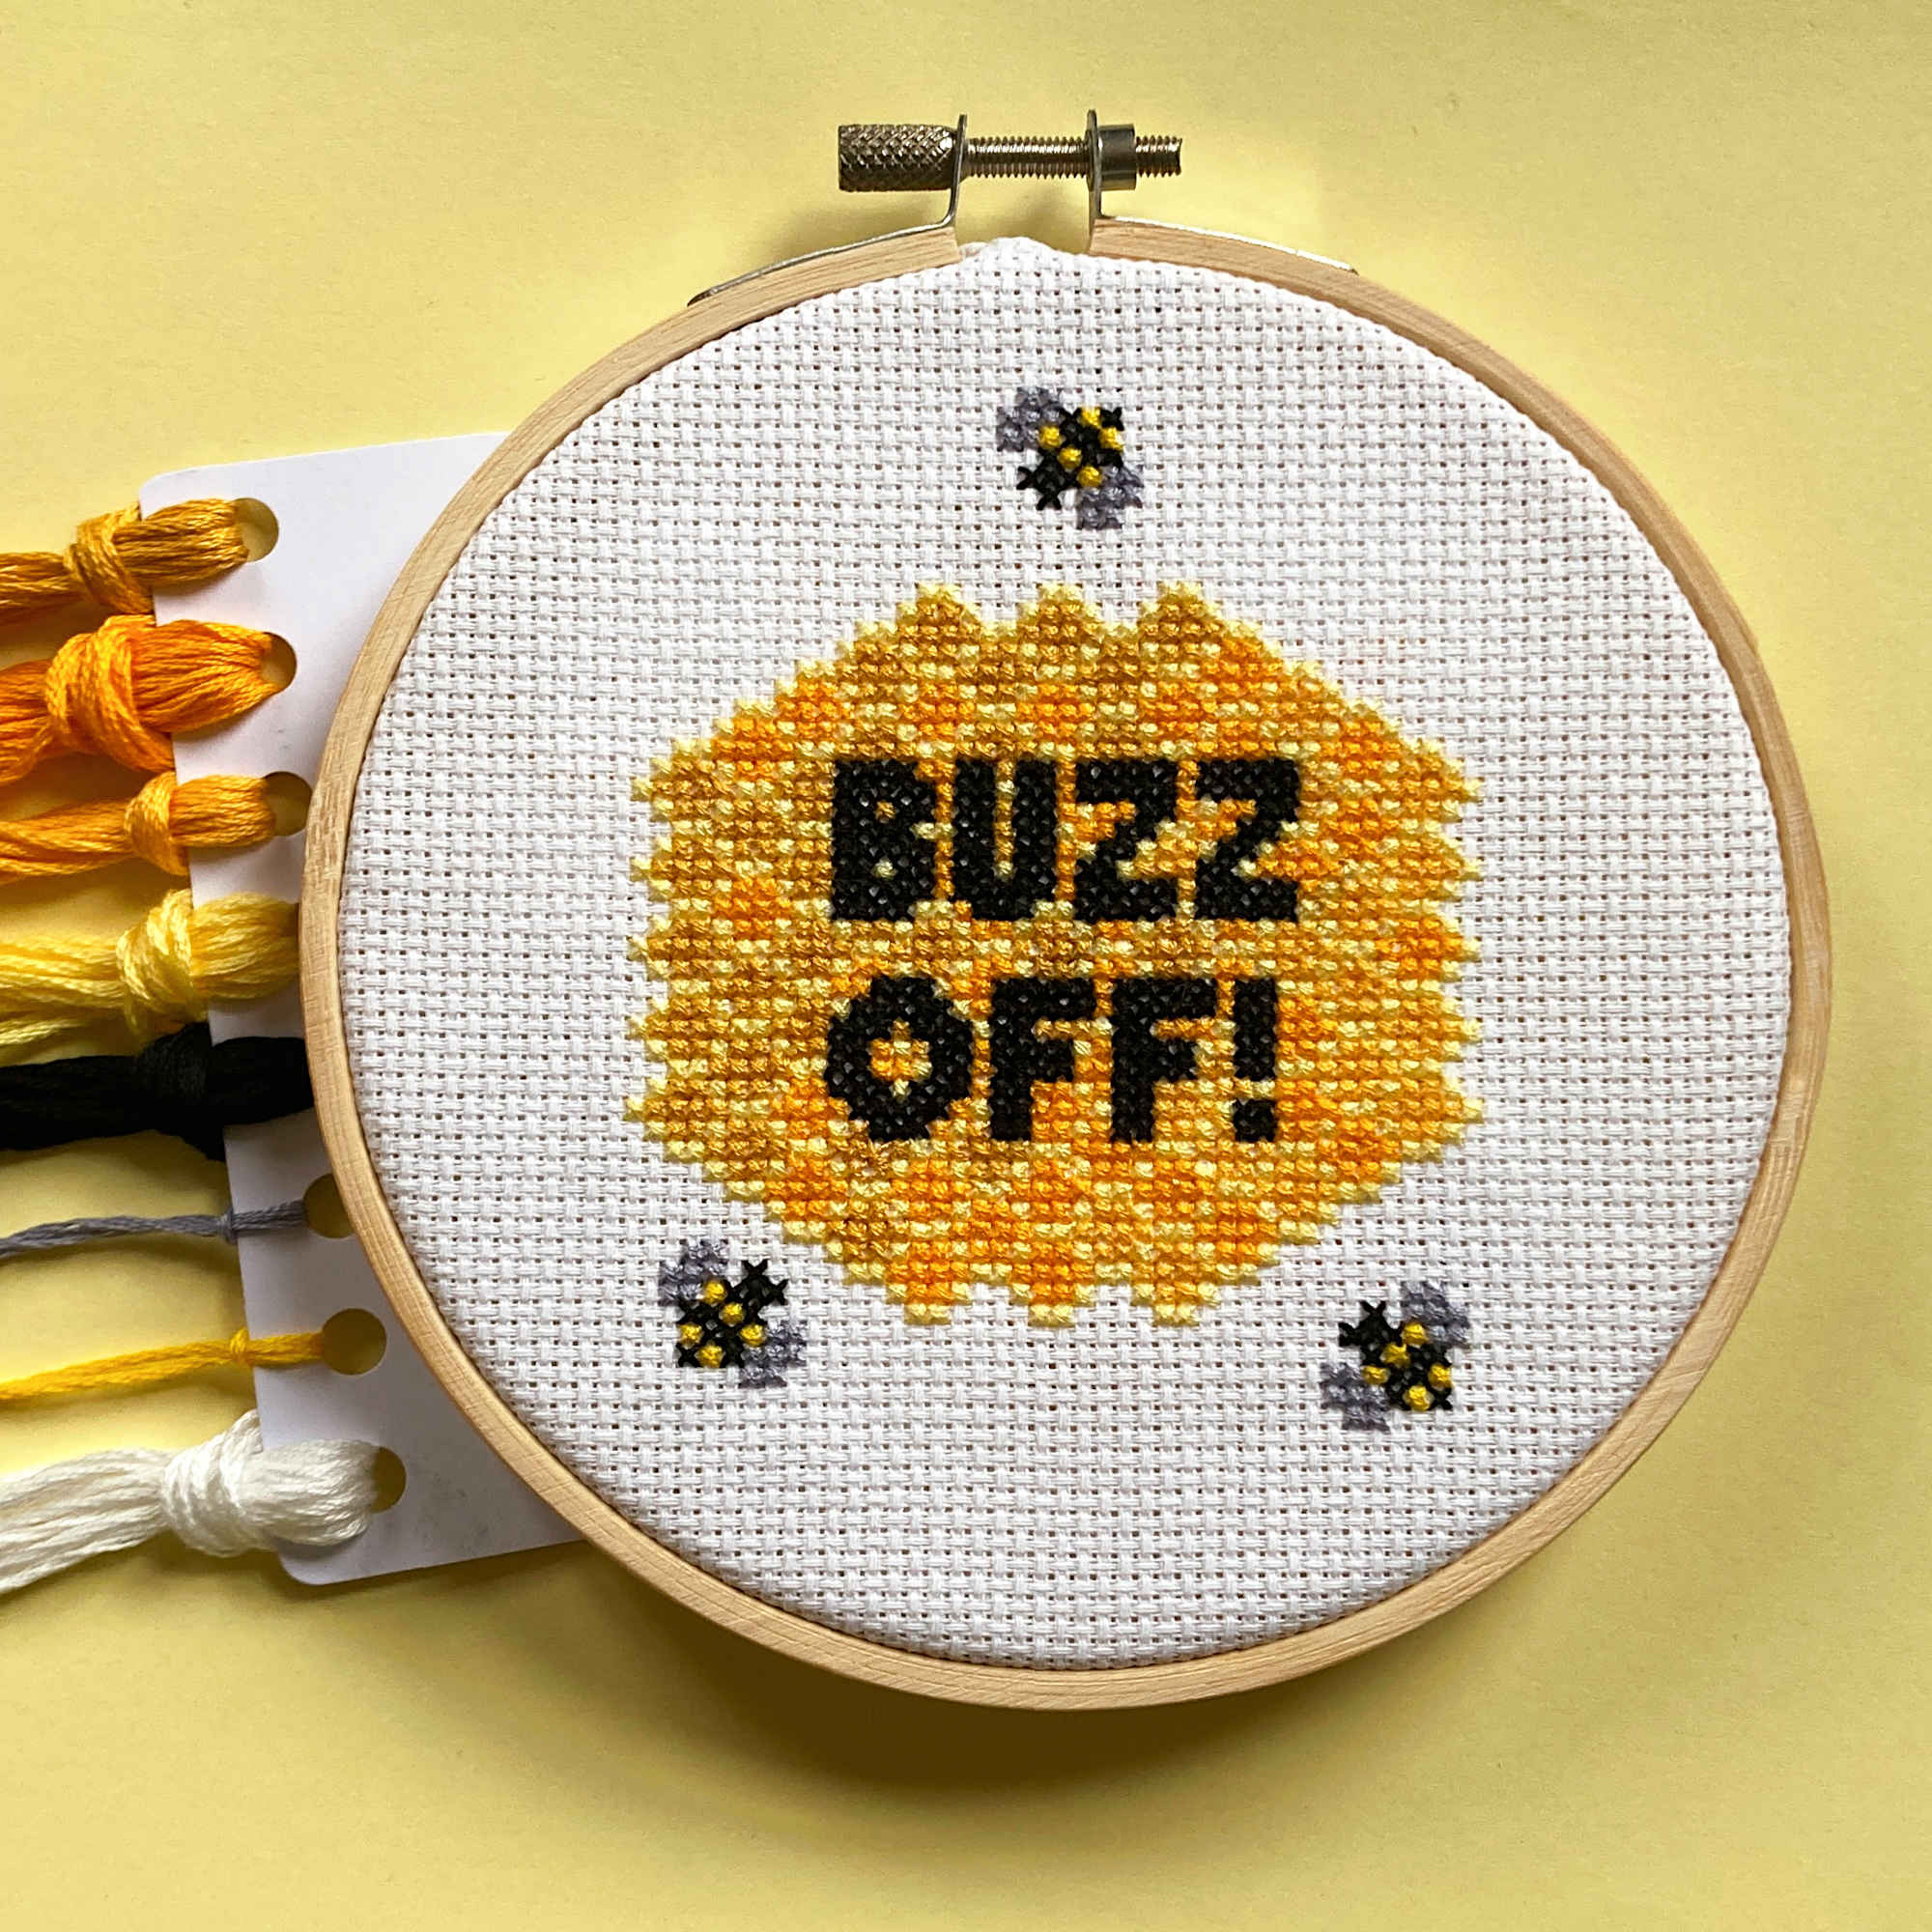 "Buzz off" honeycomb with bees cross stitch kit with DMC threads